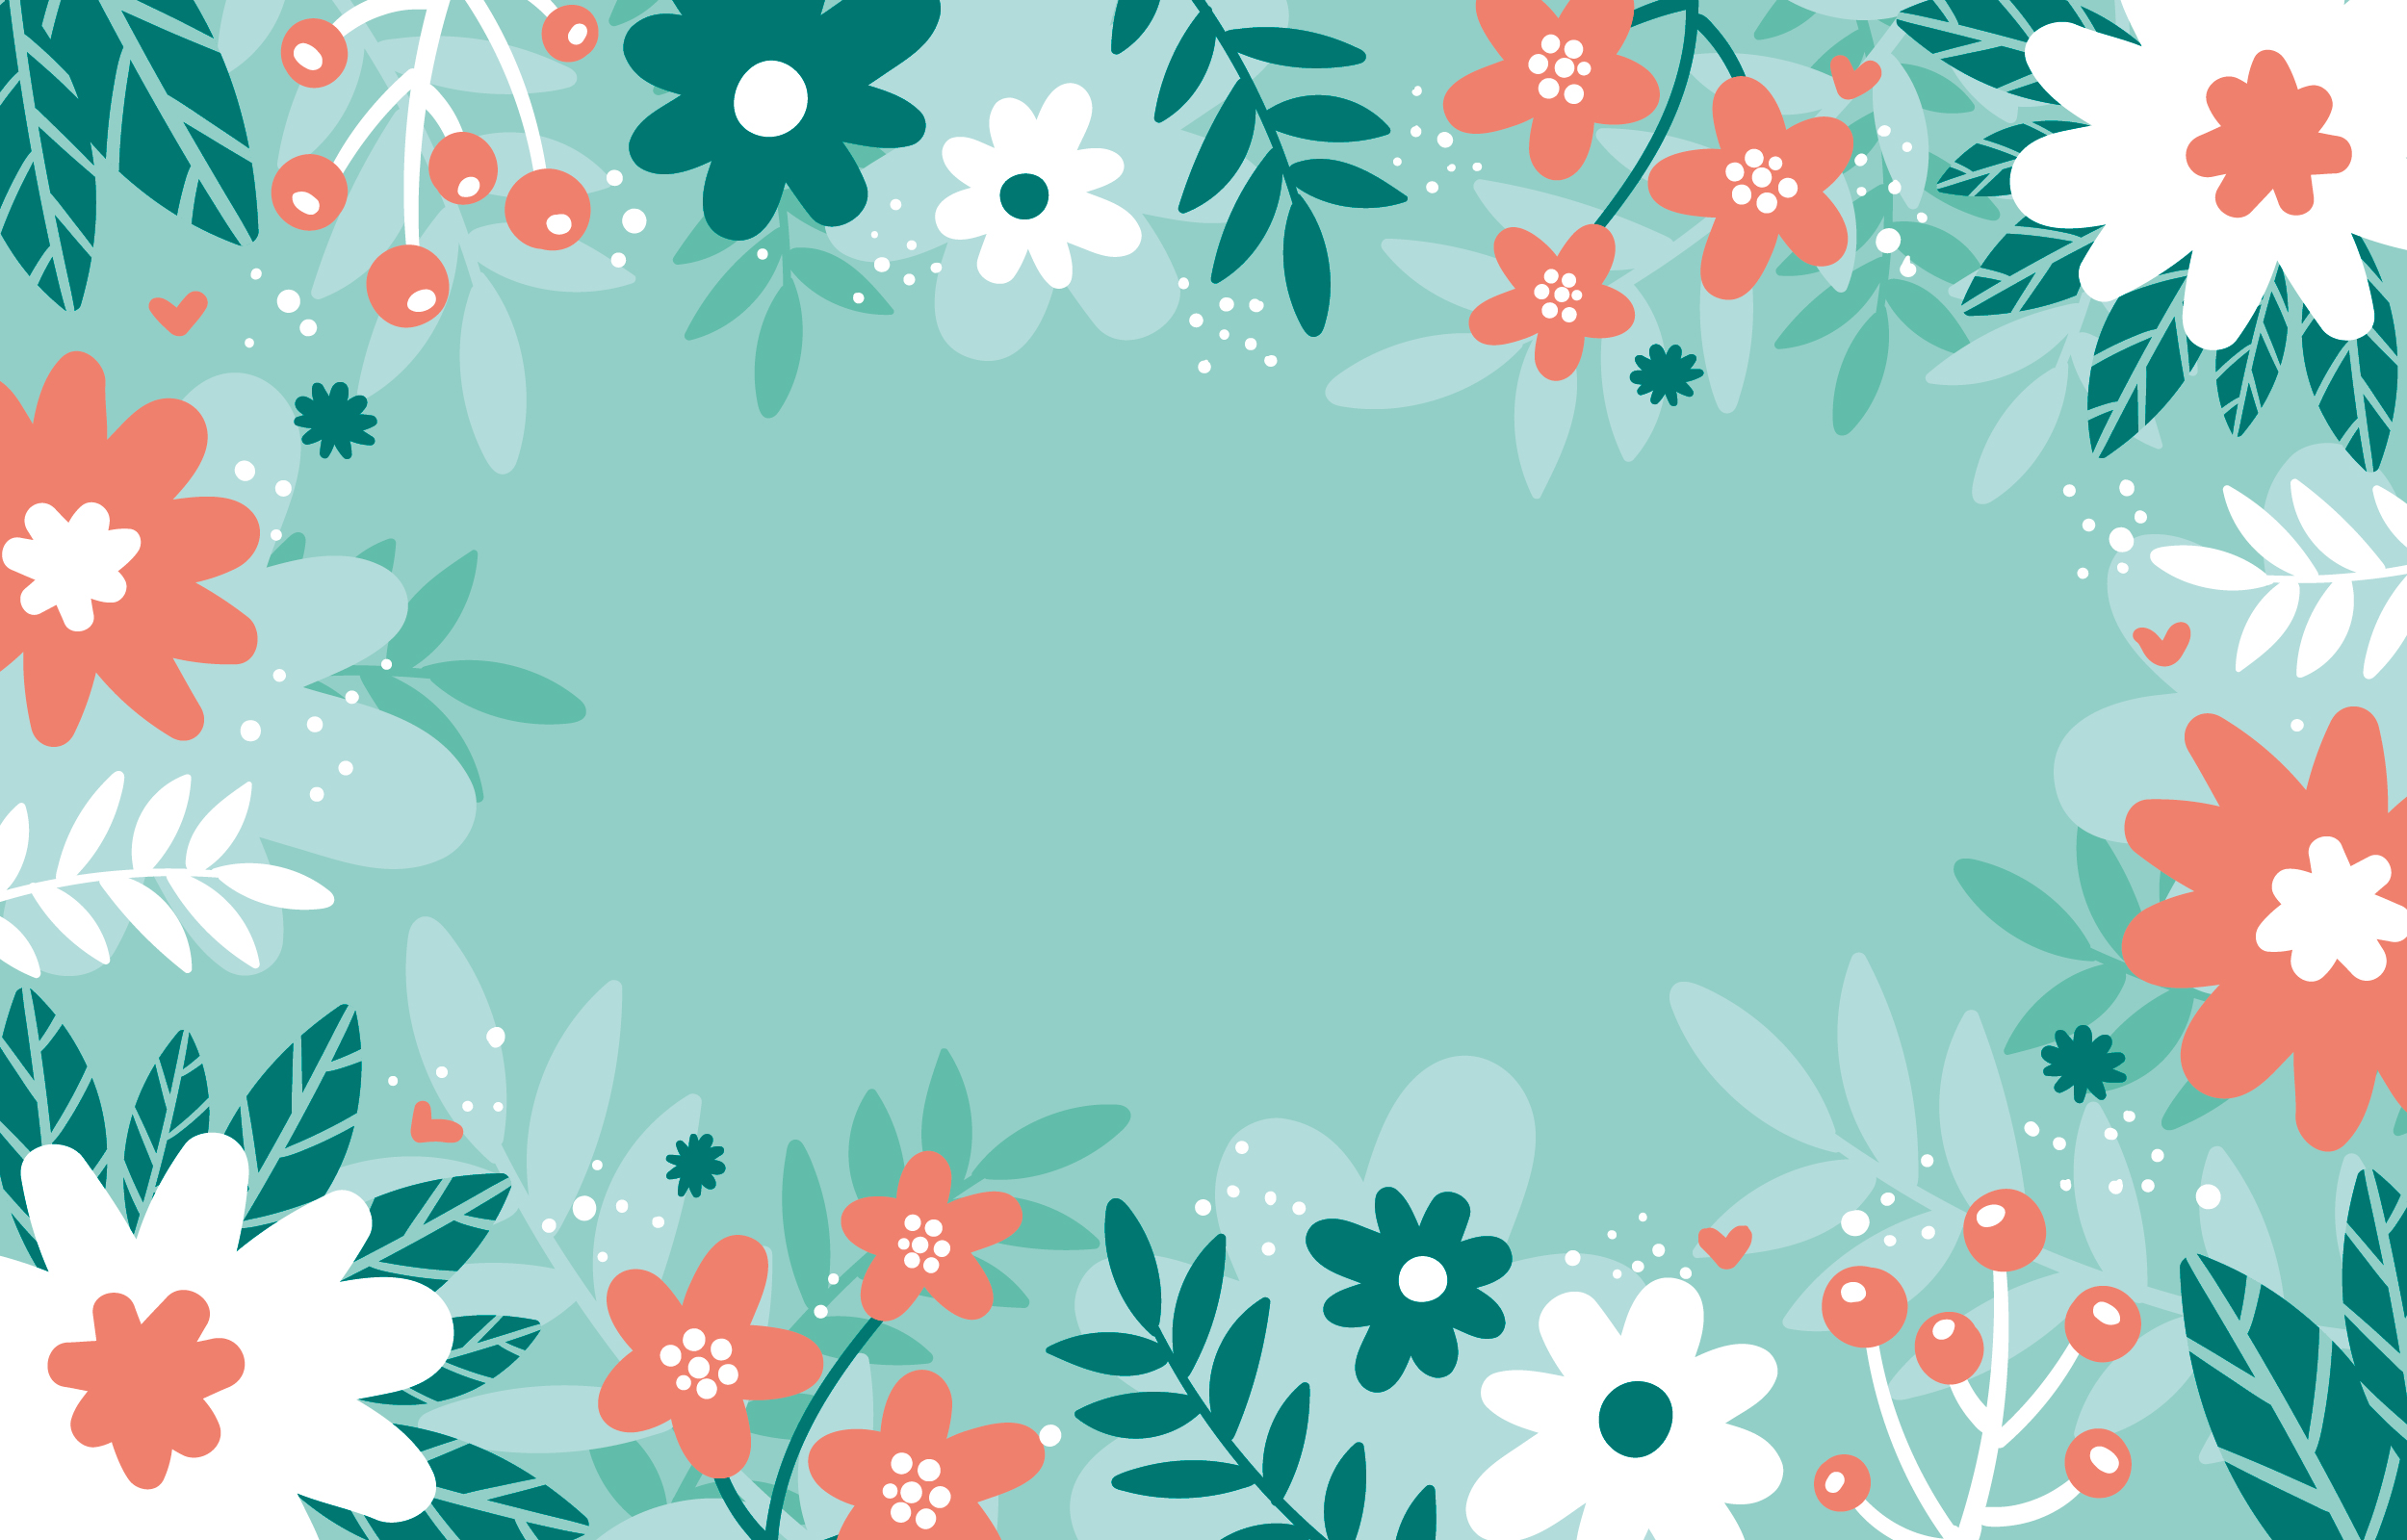 Floral Wallpaper Vector Art, Icons, and